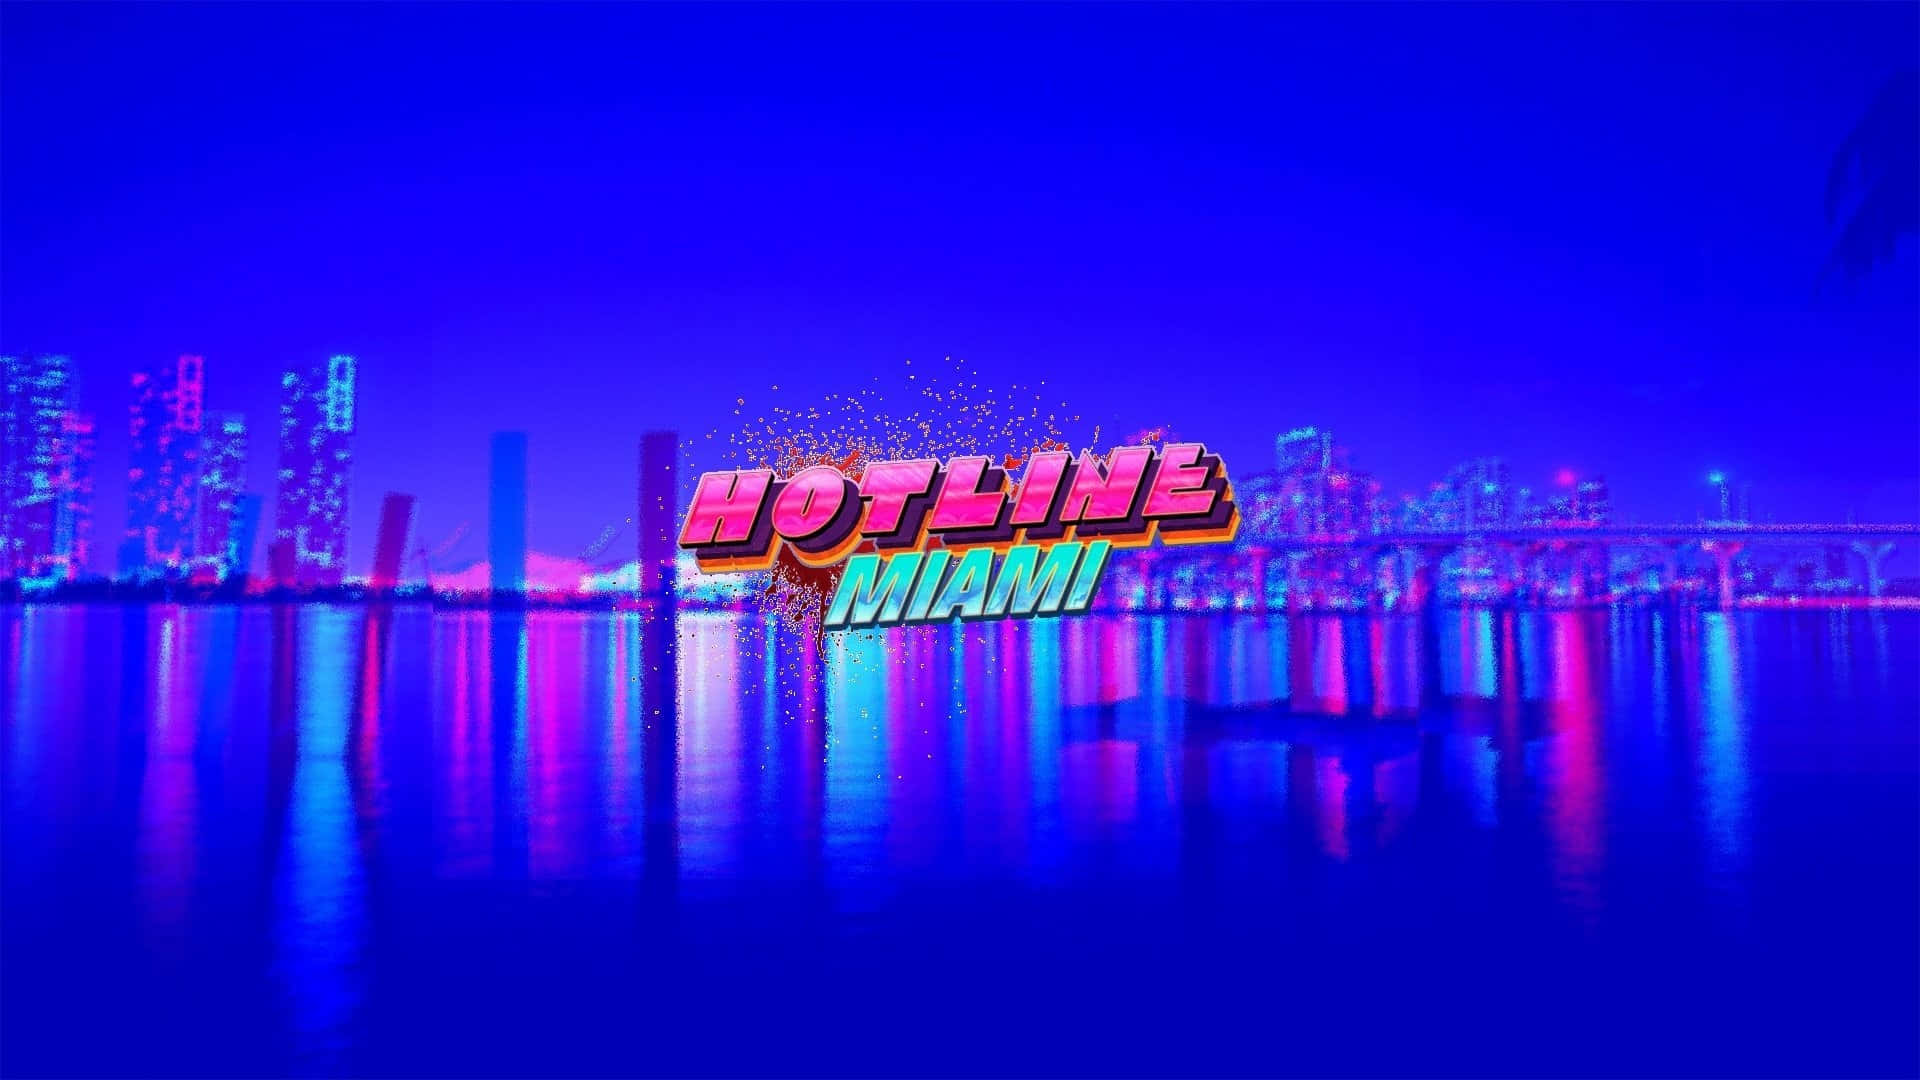 Hotline Miami action-packed gaming background